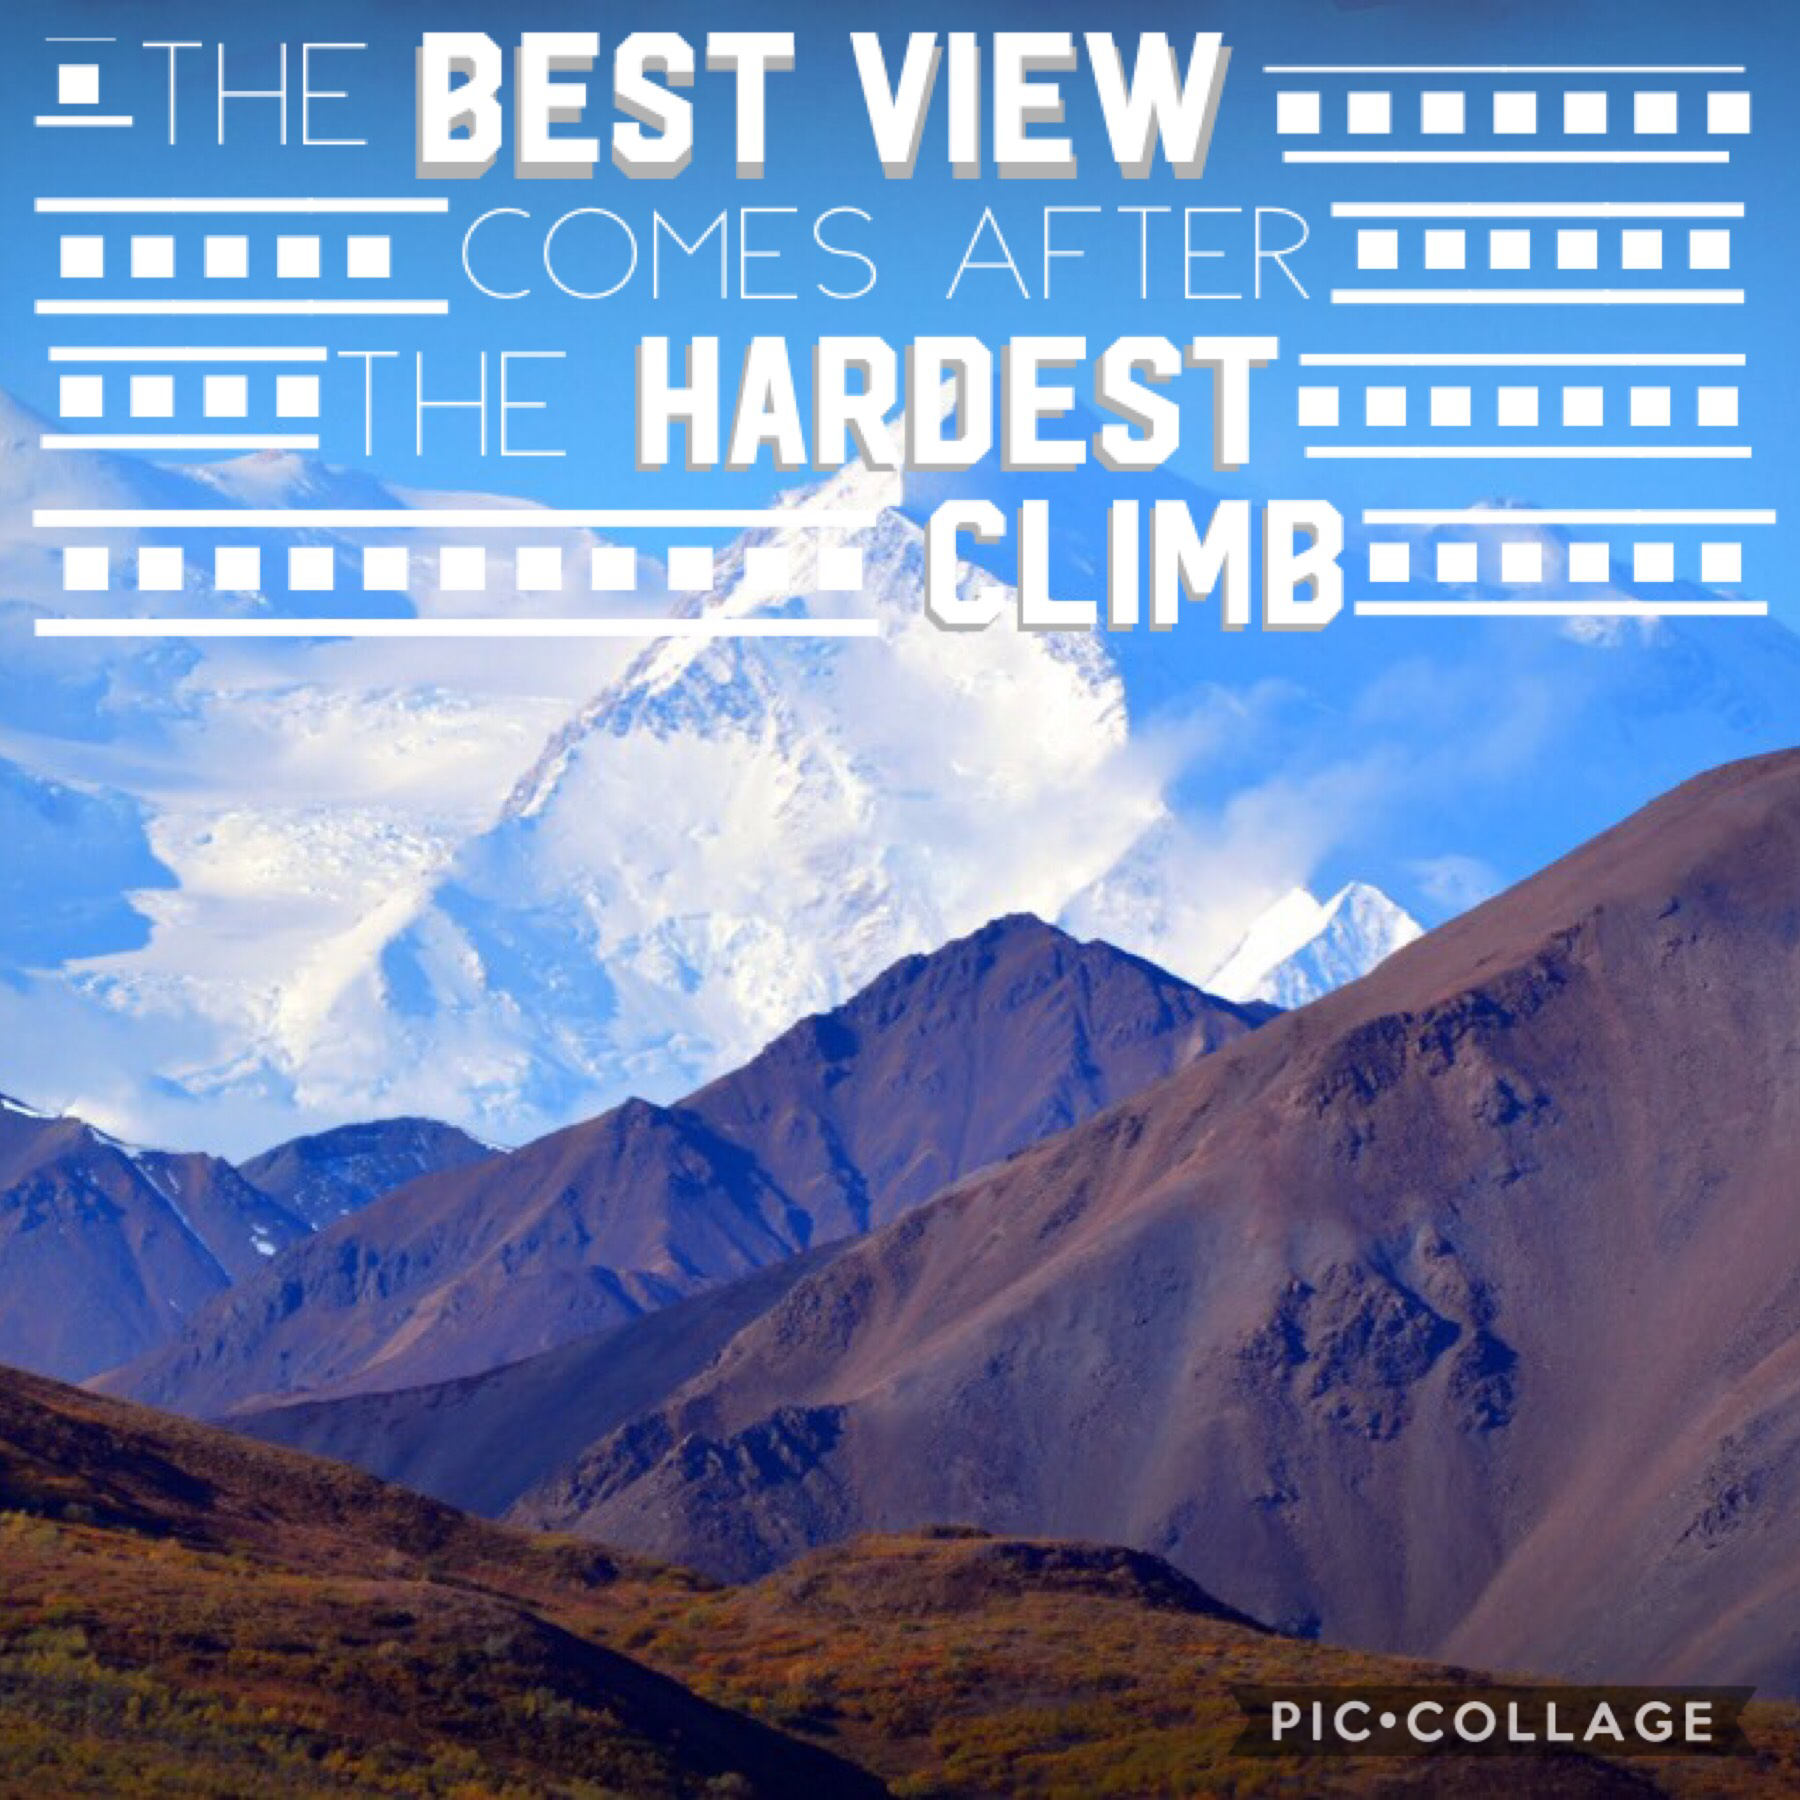 The best view comes after the hardest climb 💪